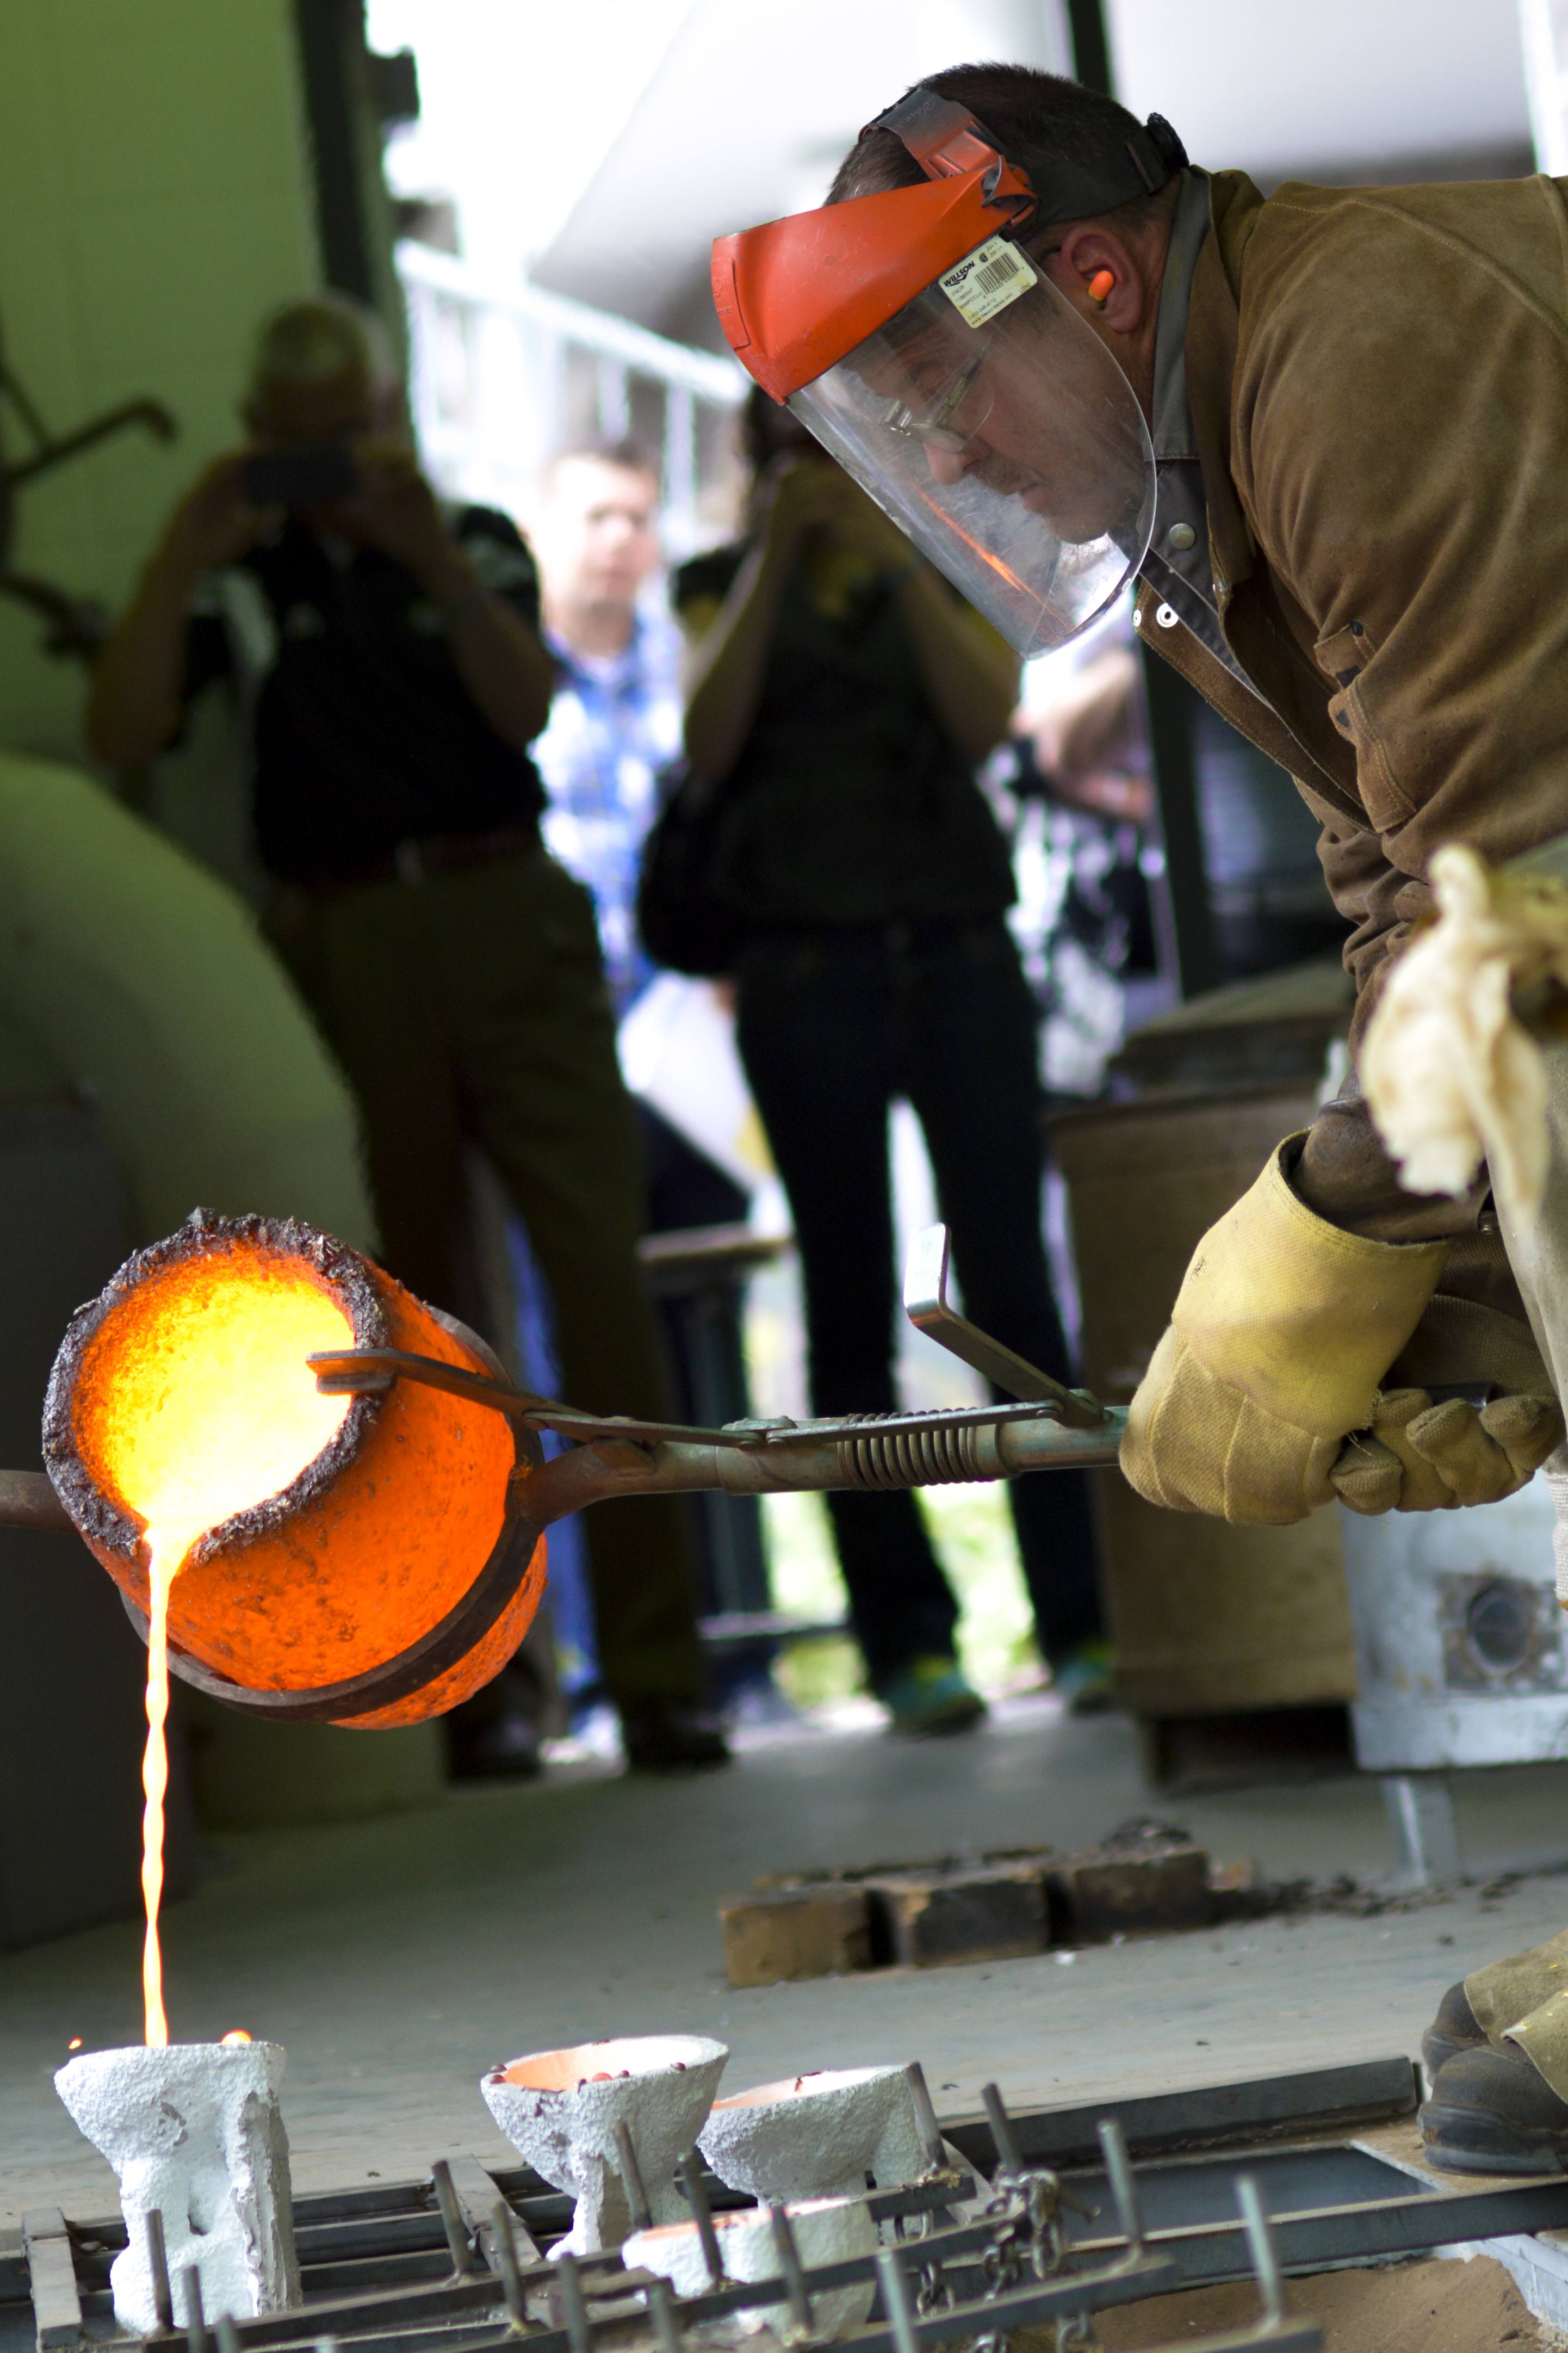 BEAUTIFUL BRONZE – Trevor Danbrook pours molten bronze into a ceramic mold during a demonstration of Red Deer College’s bronze working facilities and foundries on Monday.